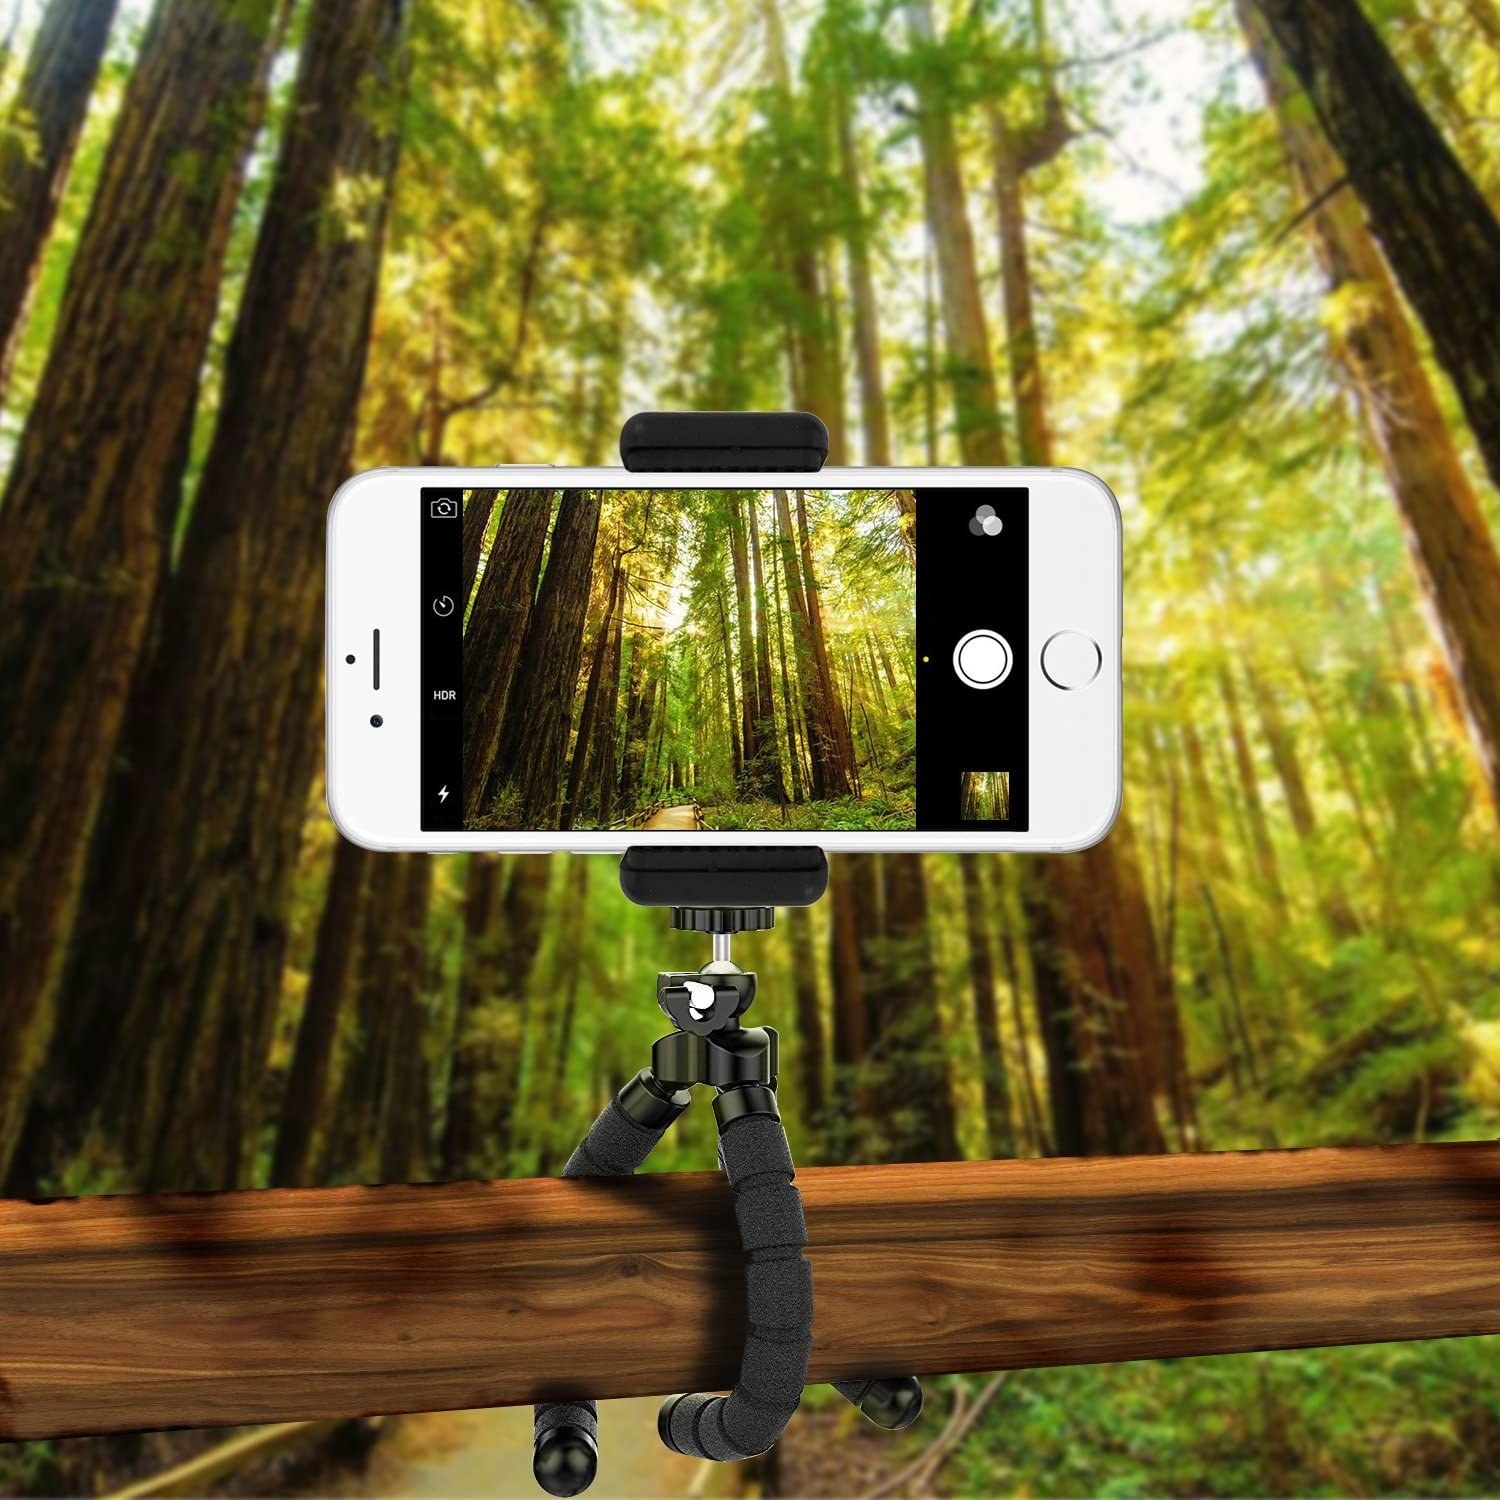 The tripod holding a smartphone, its legs wrapped around a wooden beam